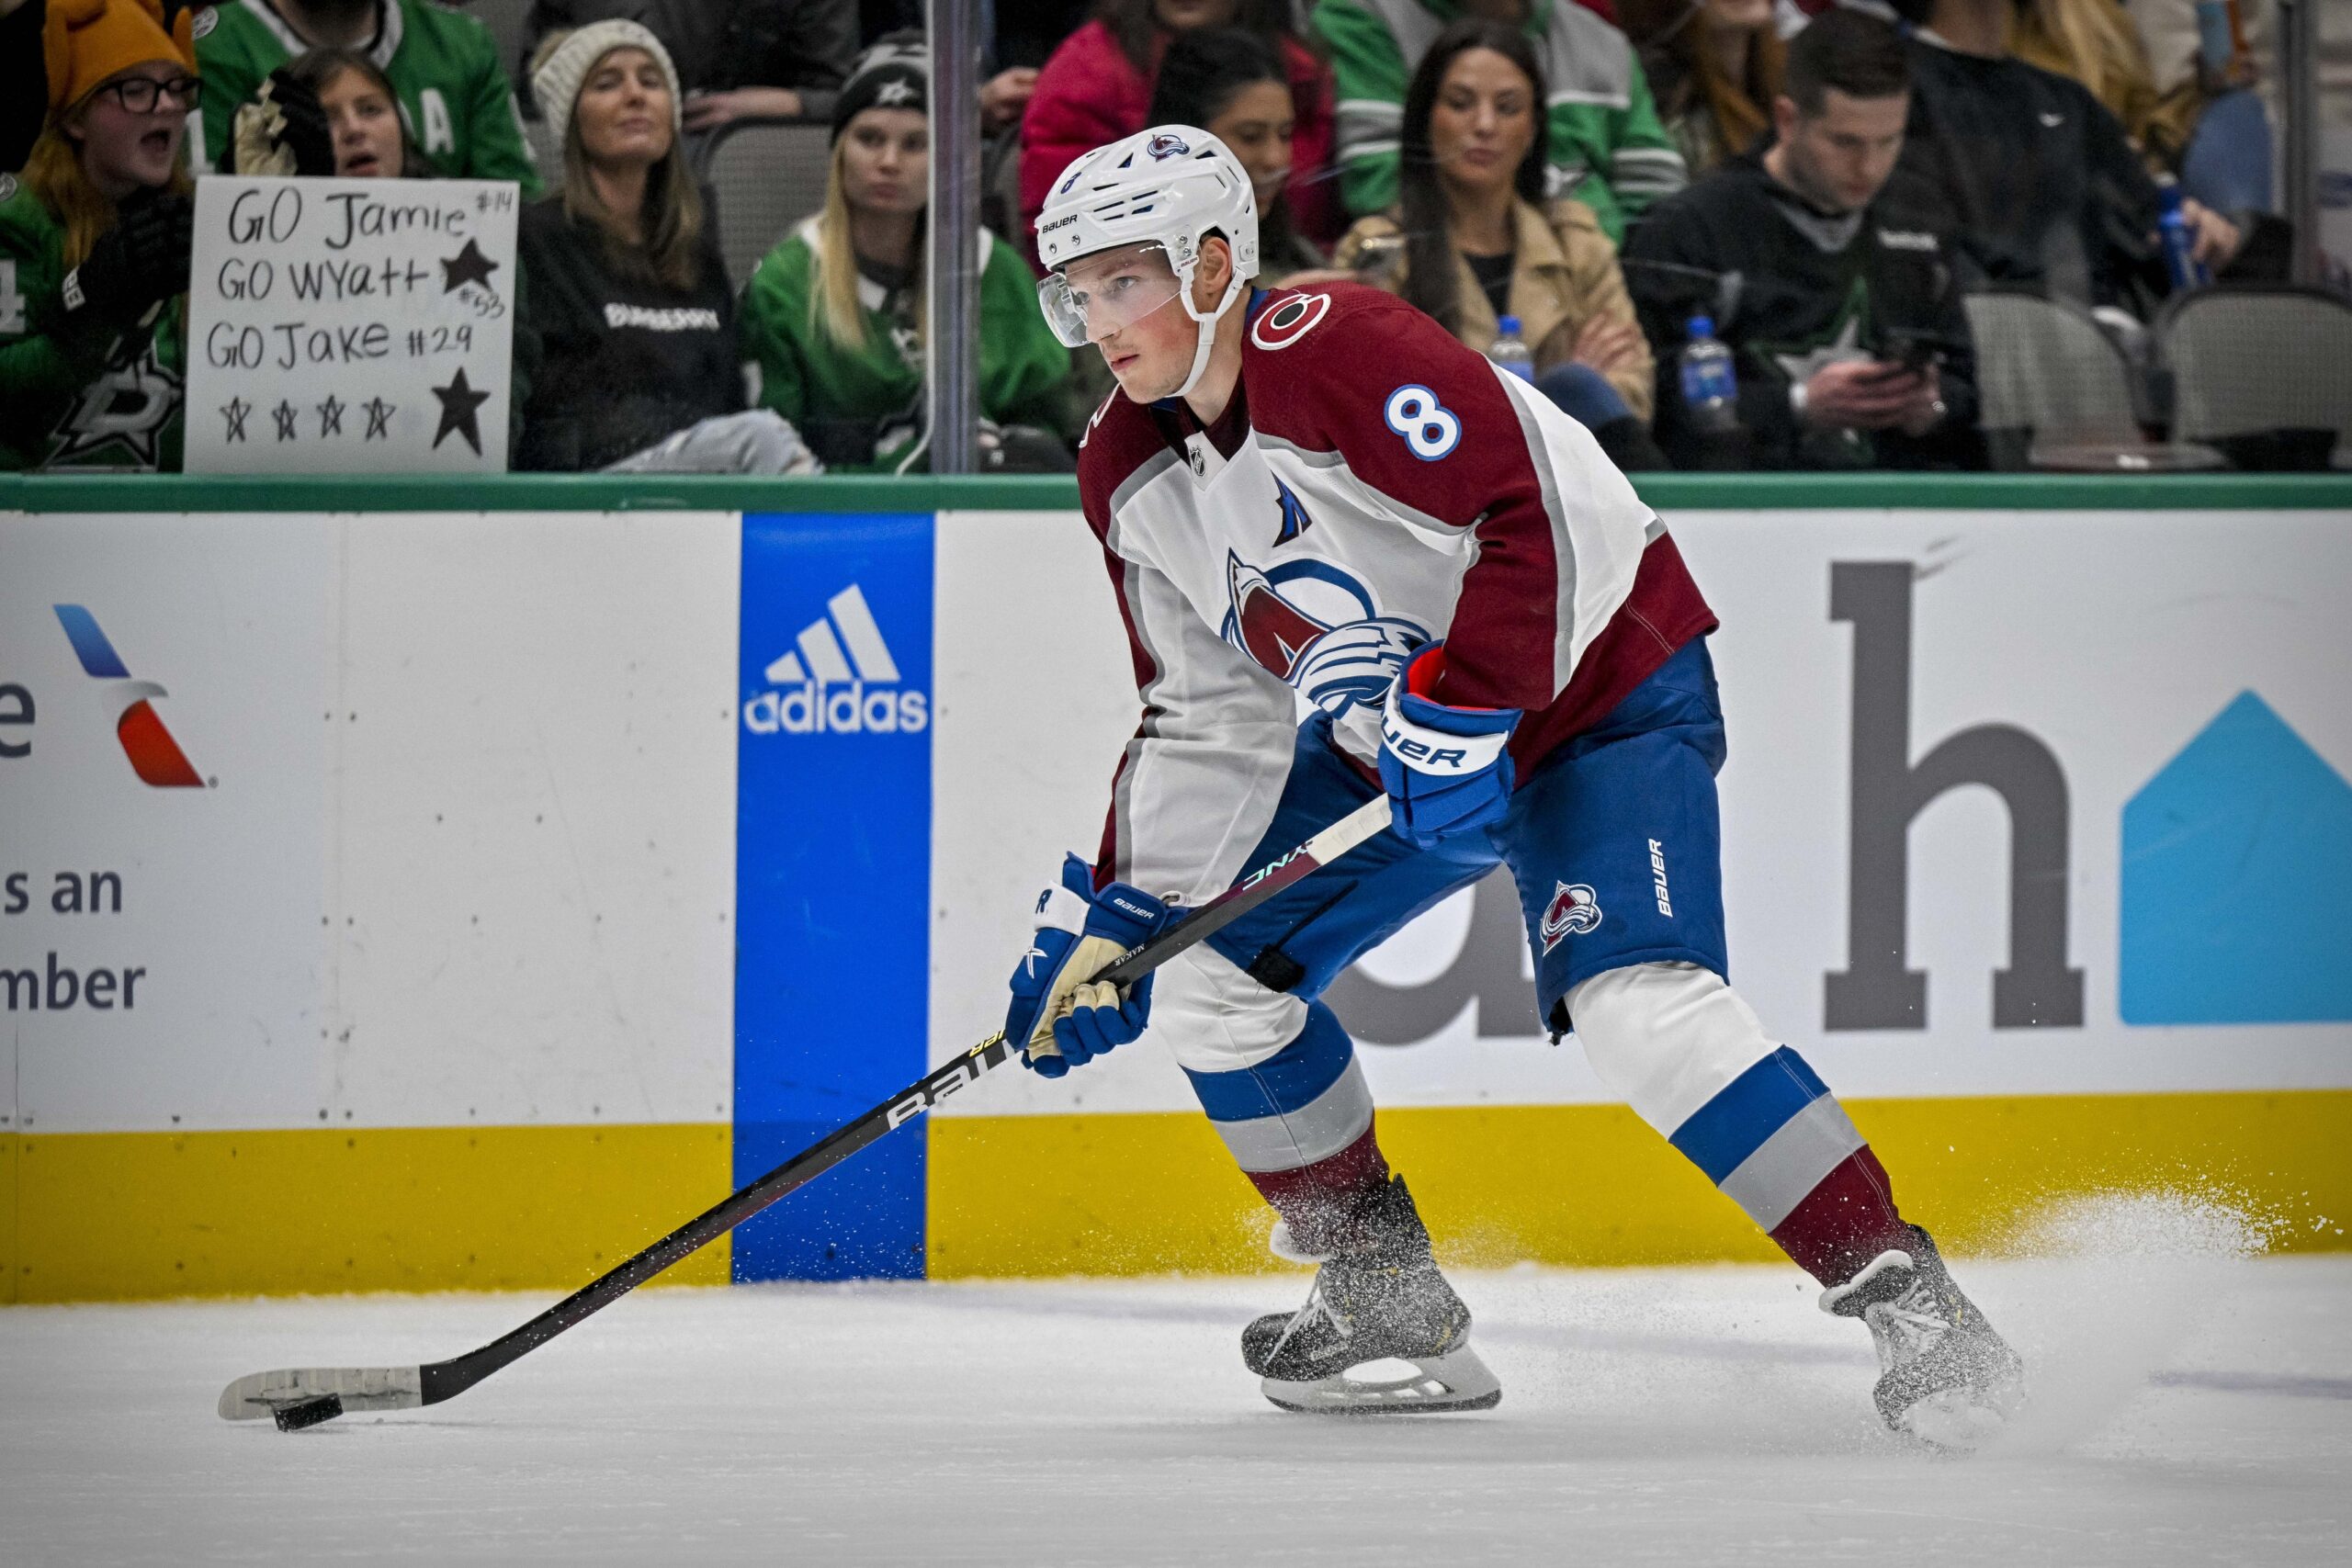 Cale Makar to represent Colorado Avalanche at 2023 NHL All-Star